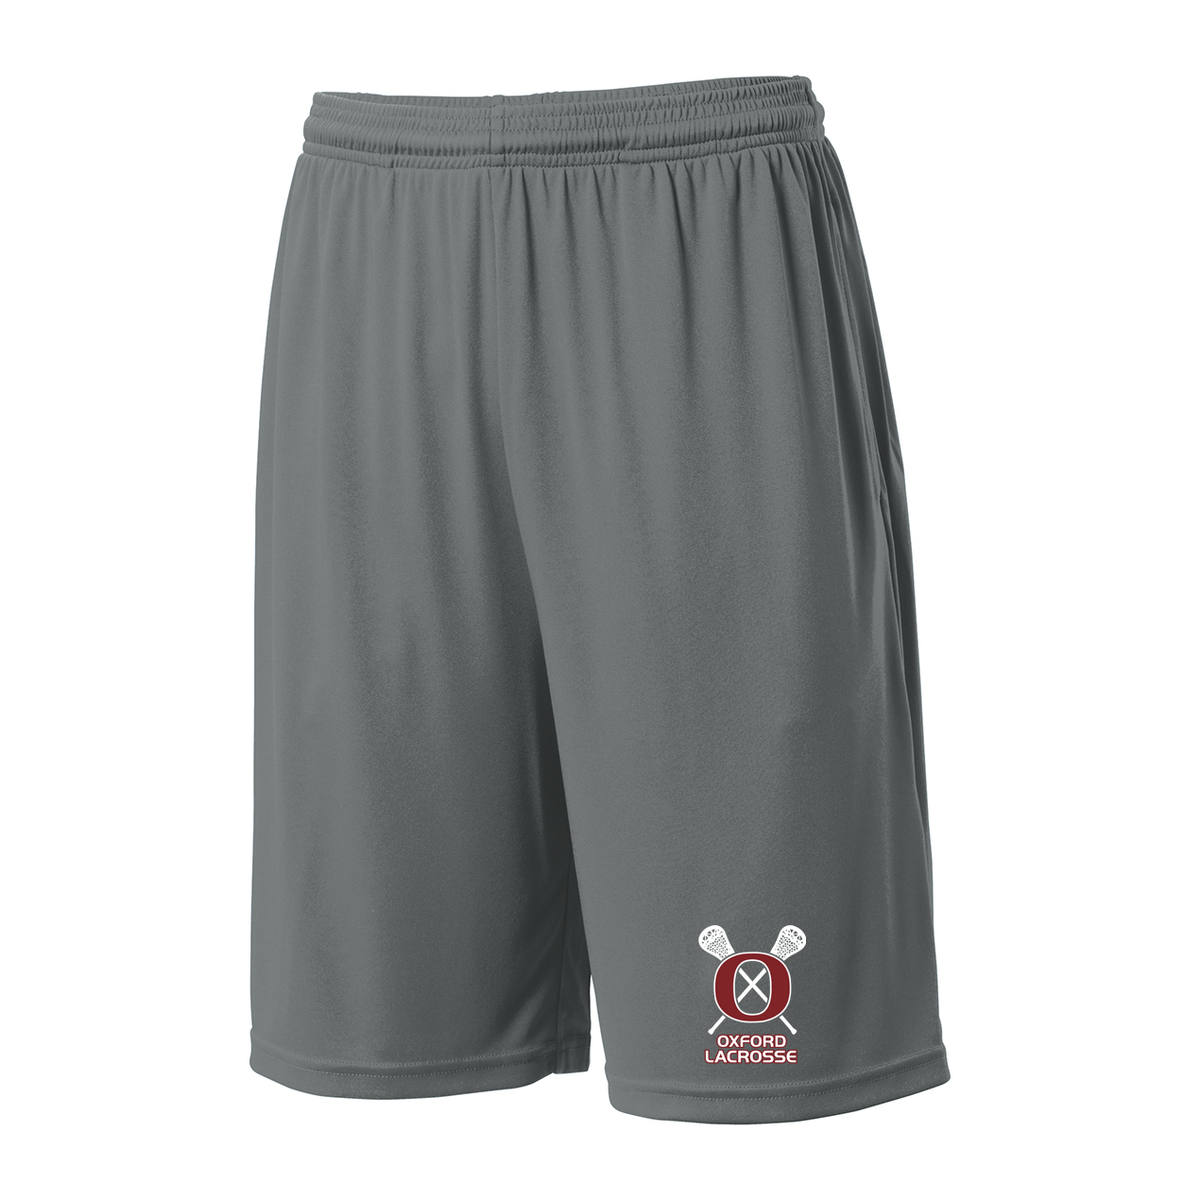 Oxford Youth Lacrosse Shorts